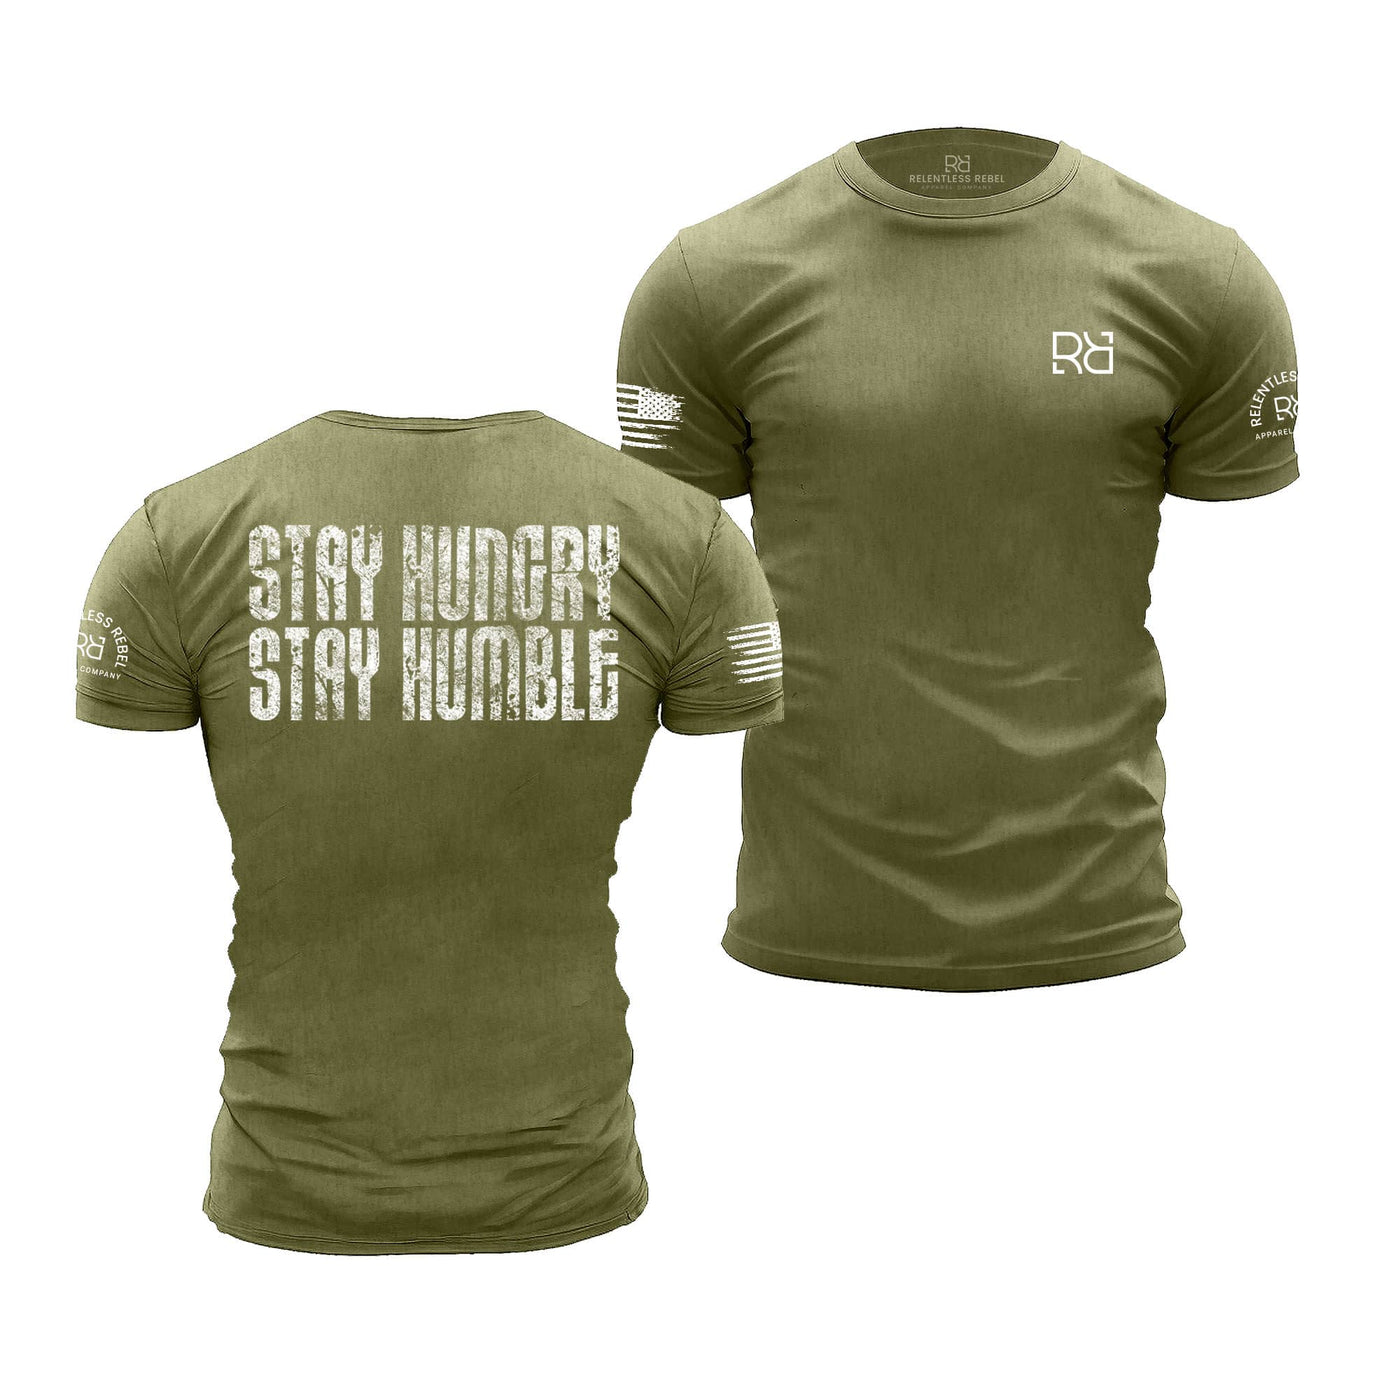 Stay Hungry Stay Humble | Premium Men's Tee